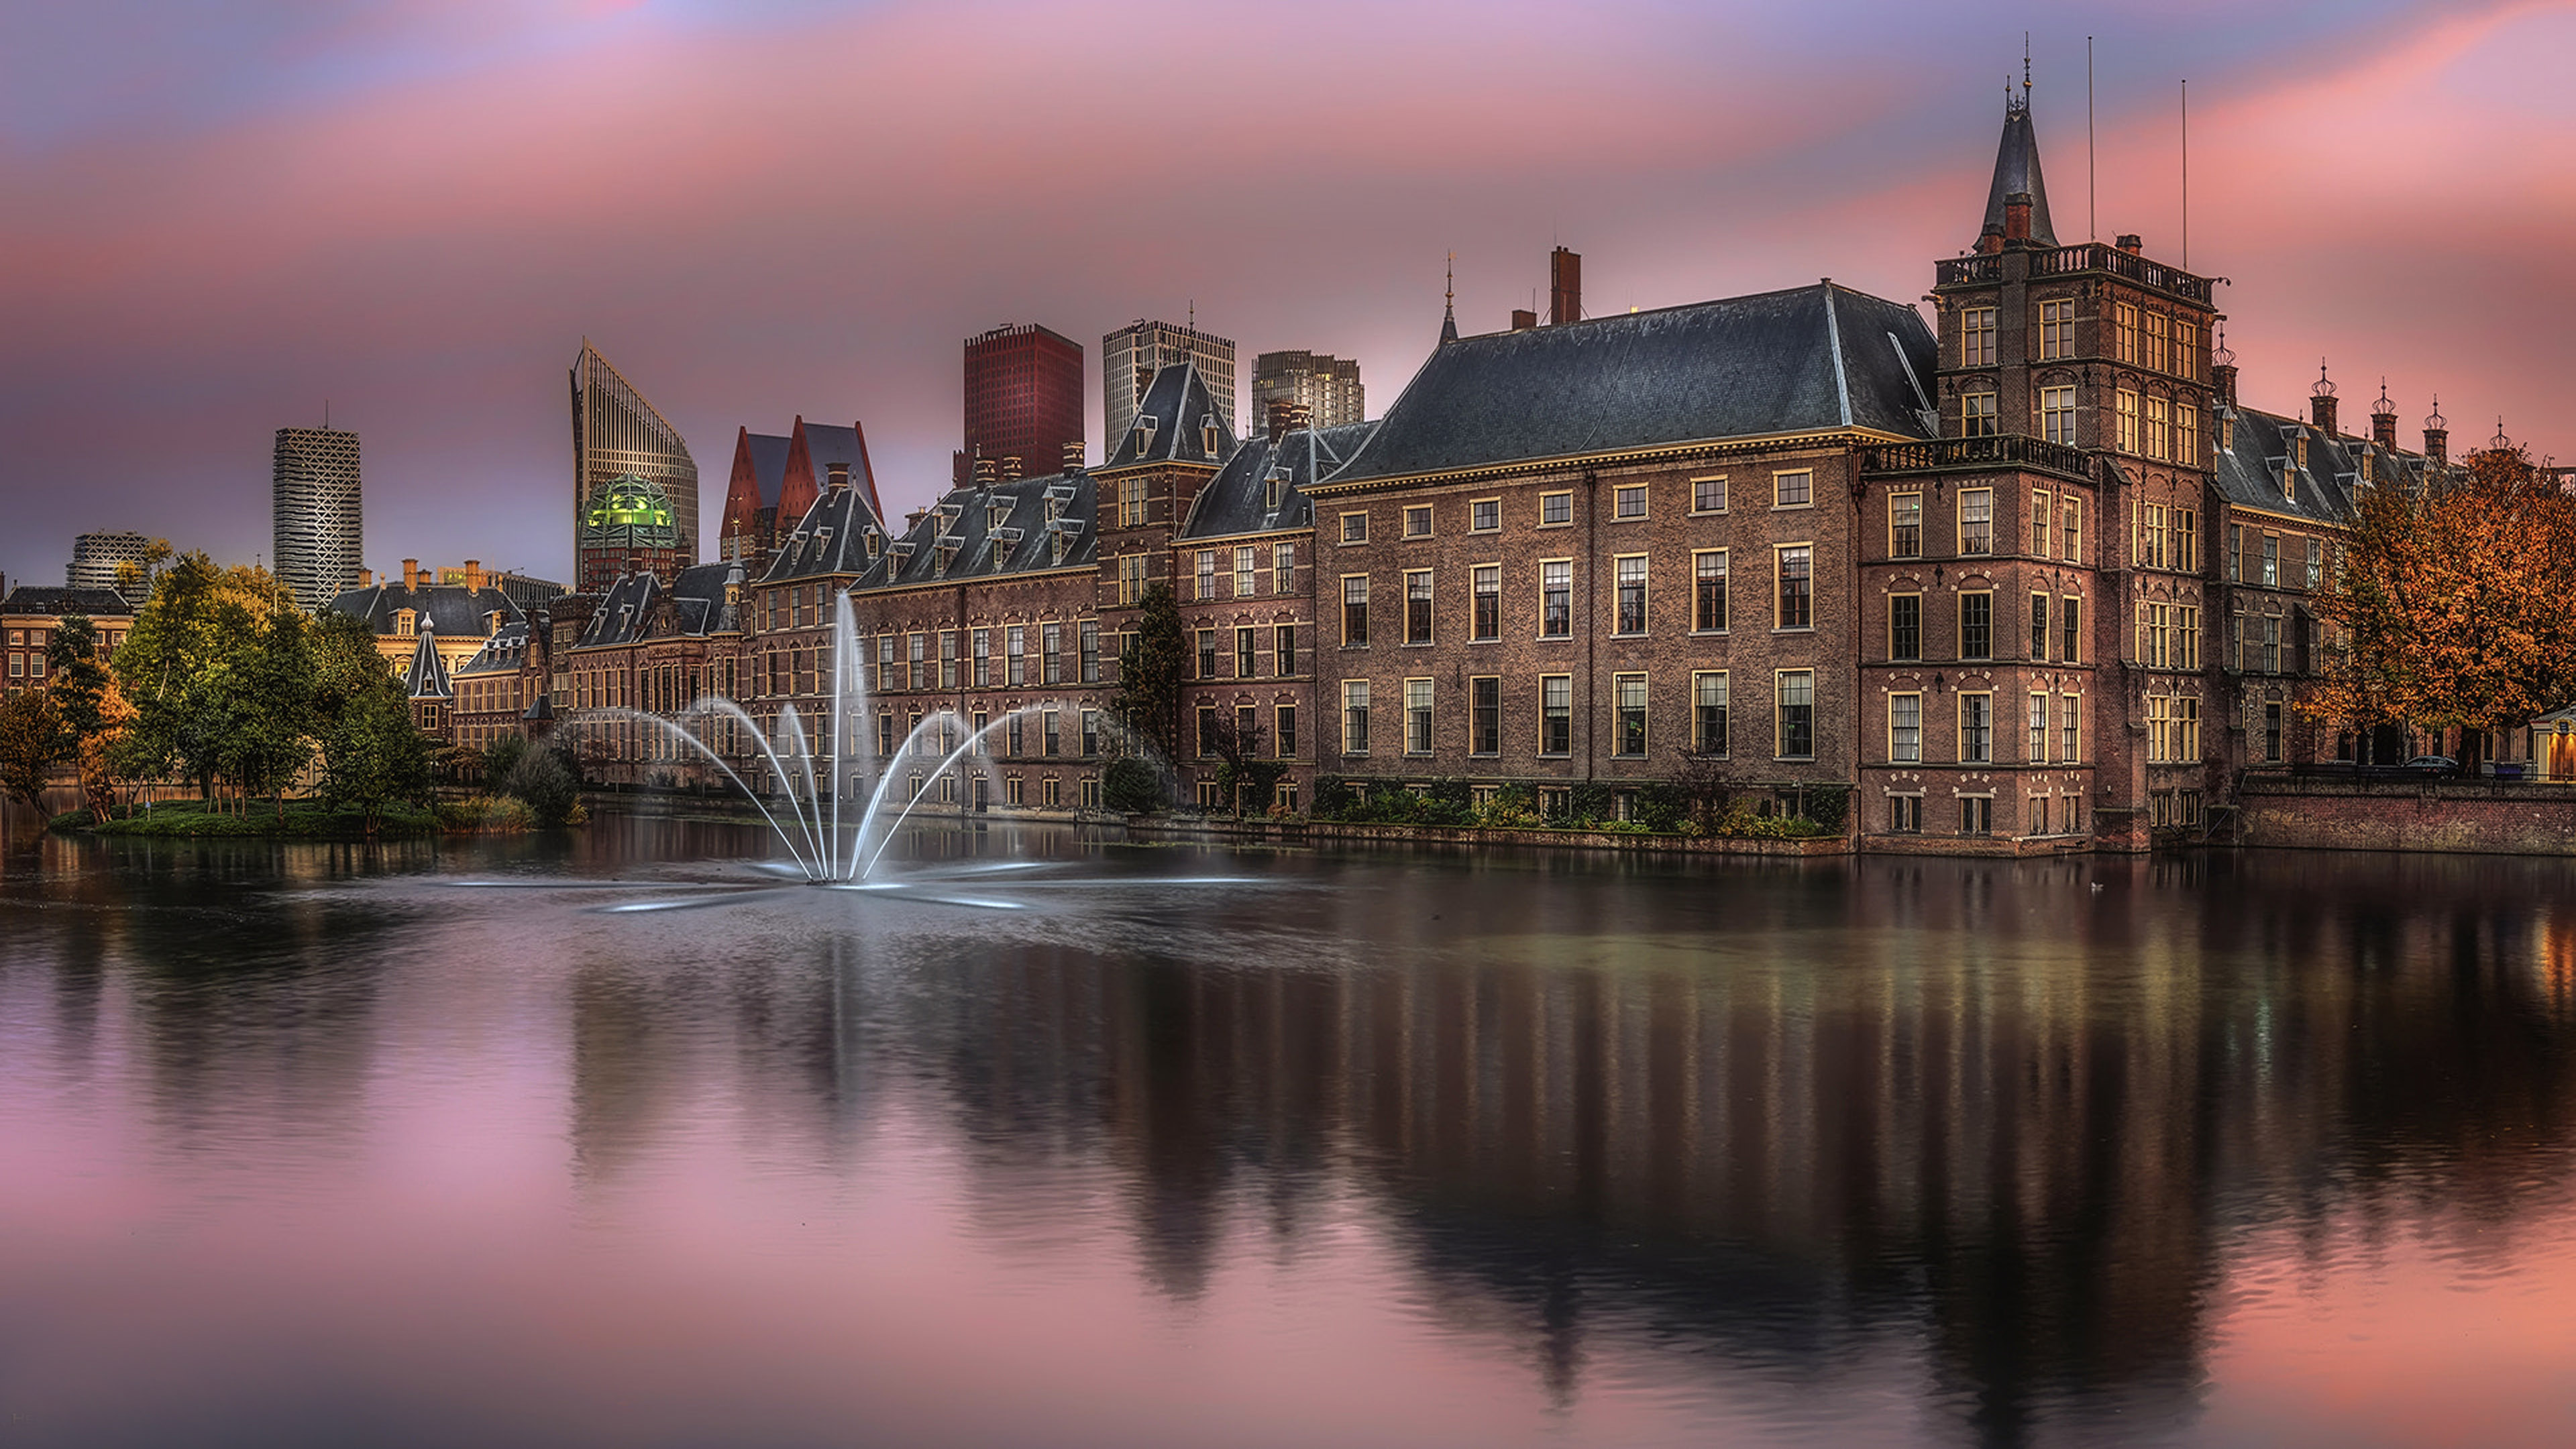 Binnenhof Is A Complex Of The City In The City Hague Netherlands 4k